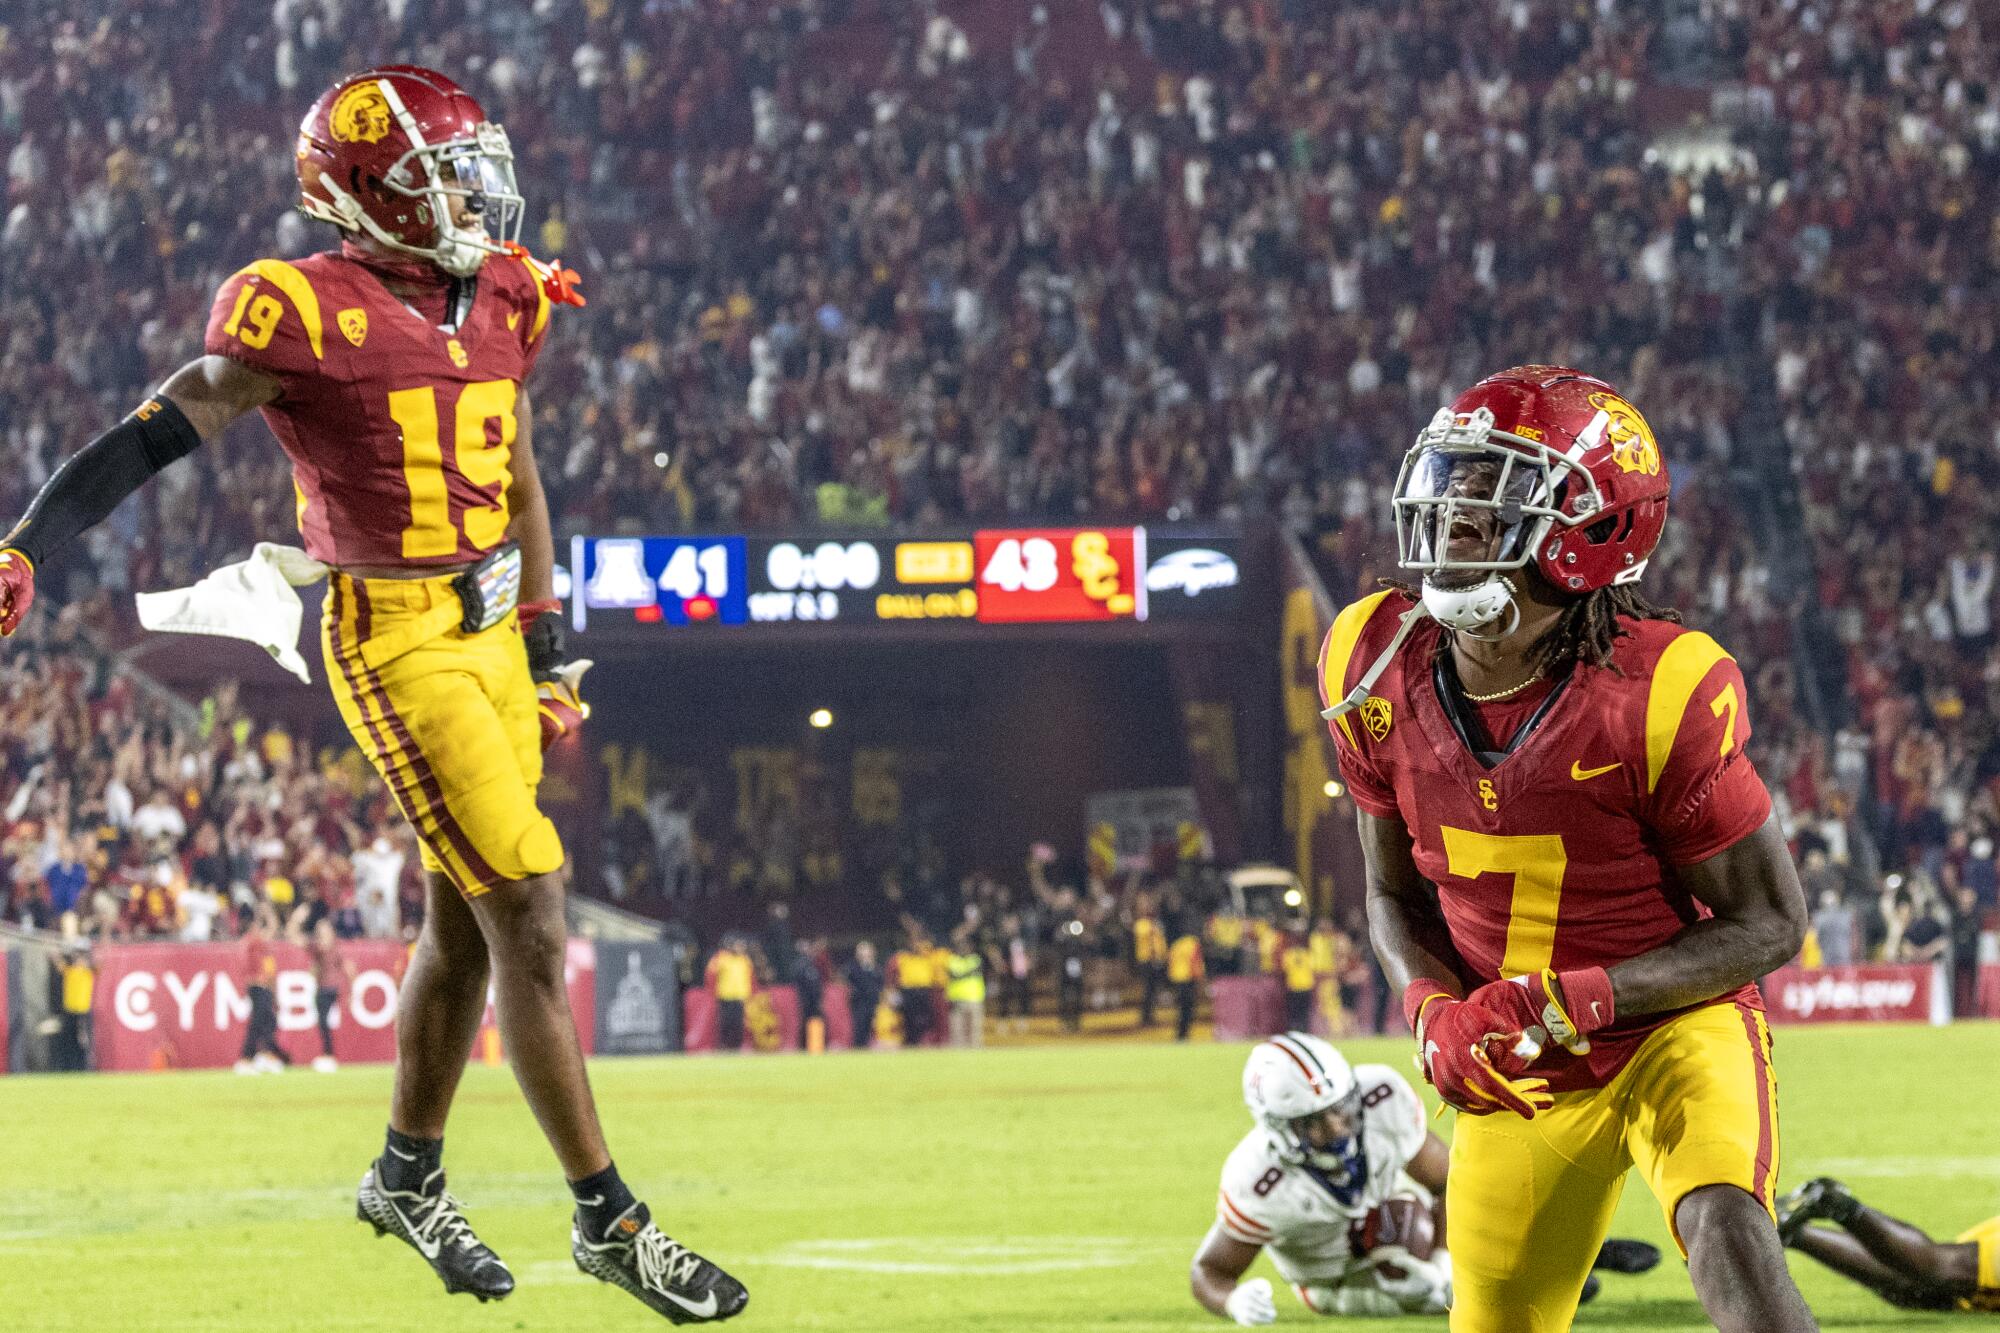 Trojans safeties Calen Bullock and Jaylin Smith jump and celebrate on the field near opponent on the ground.